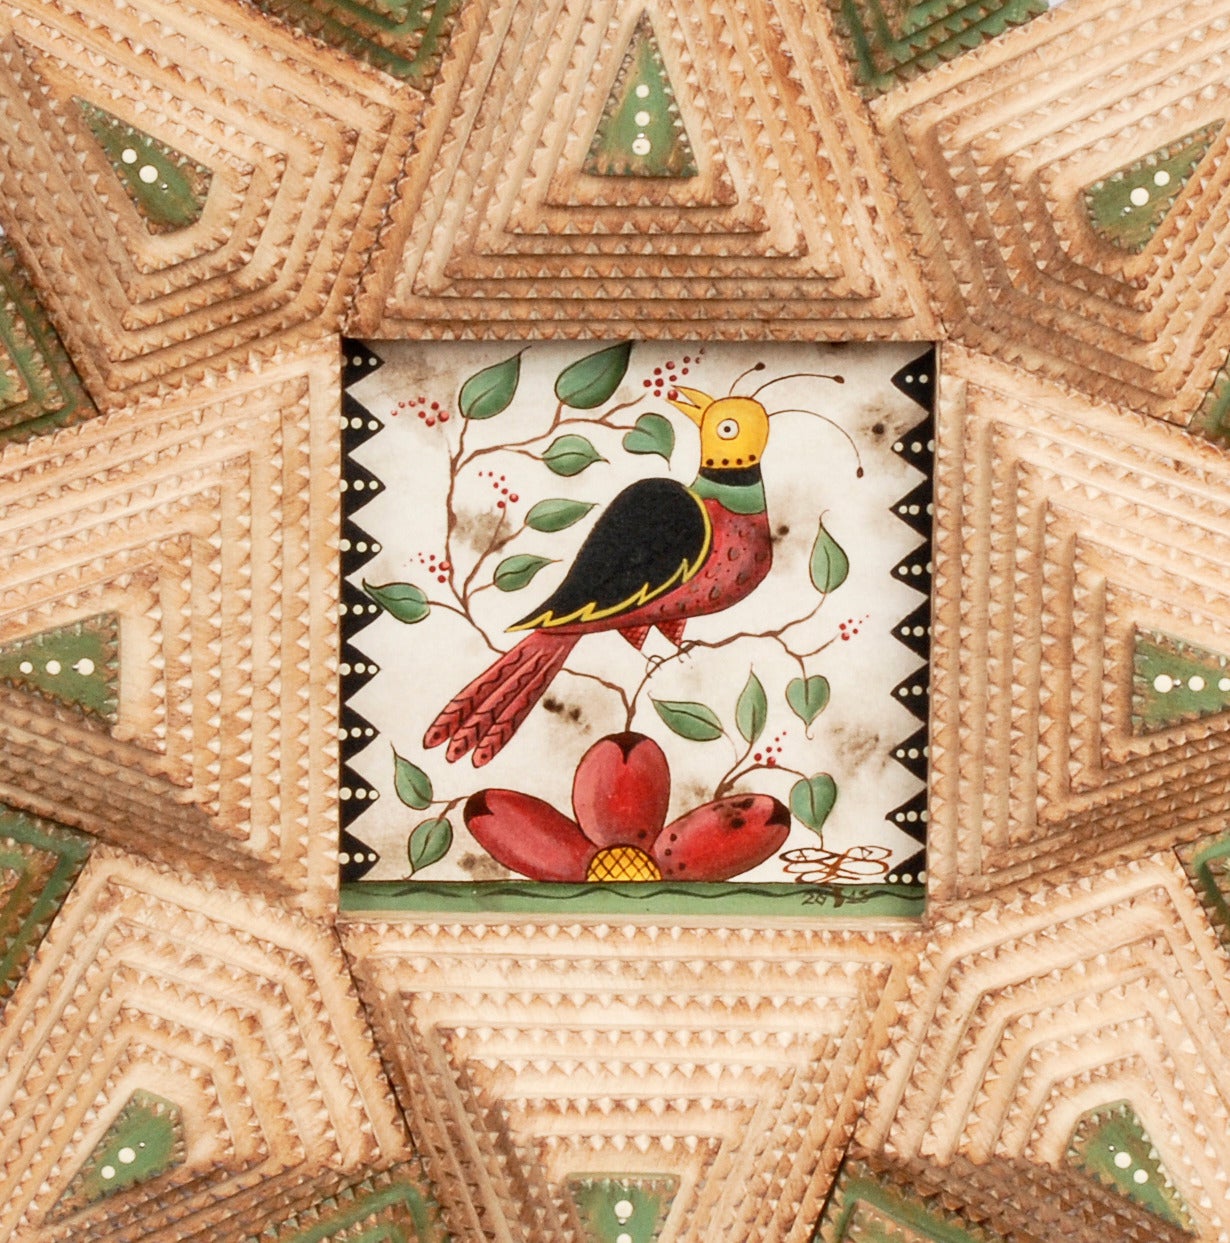 A lovely Tramp Art star-shaped frame by noted artist Angie Dow. The frame has a wonderful watercolor of a bird siting on a branch eating berries.